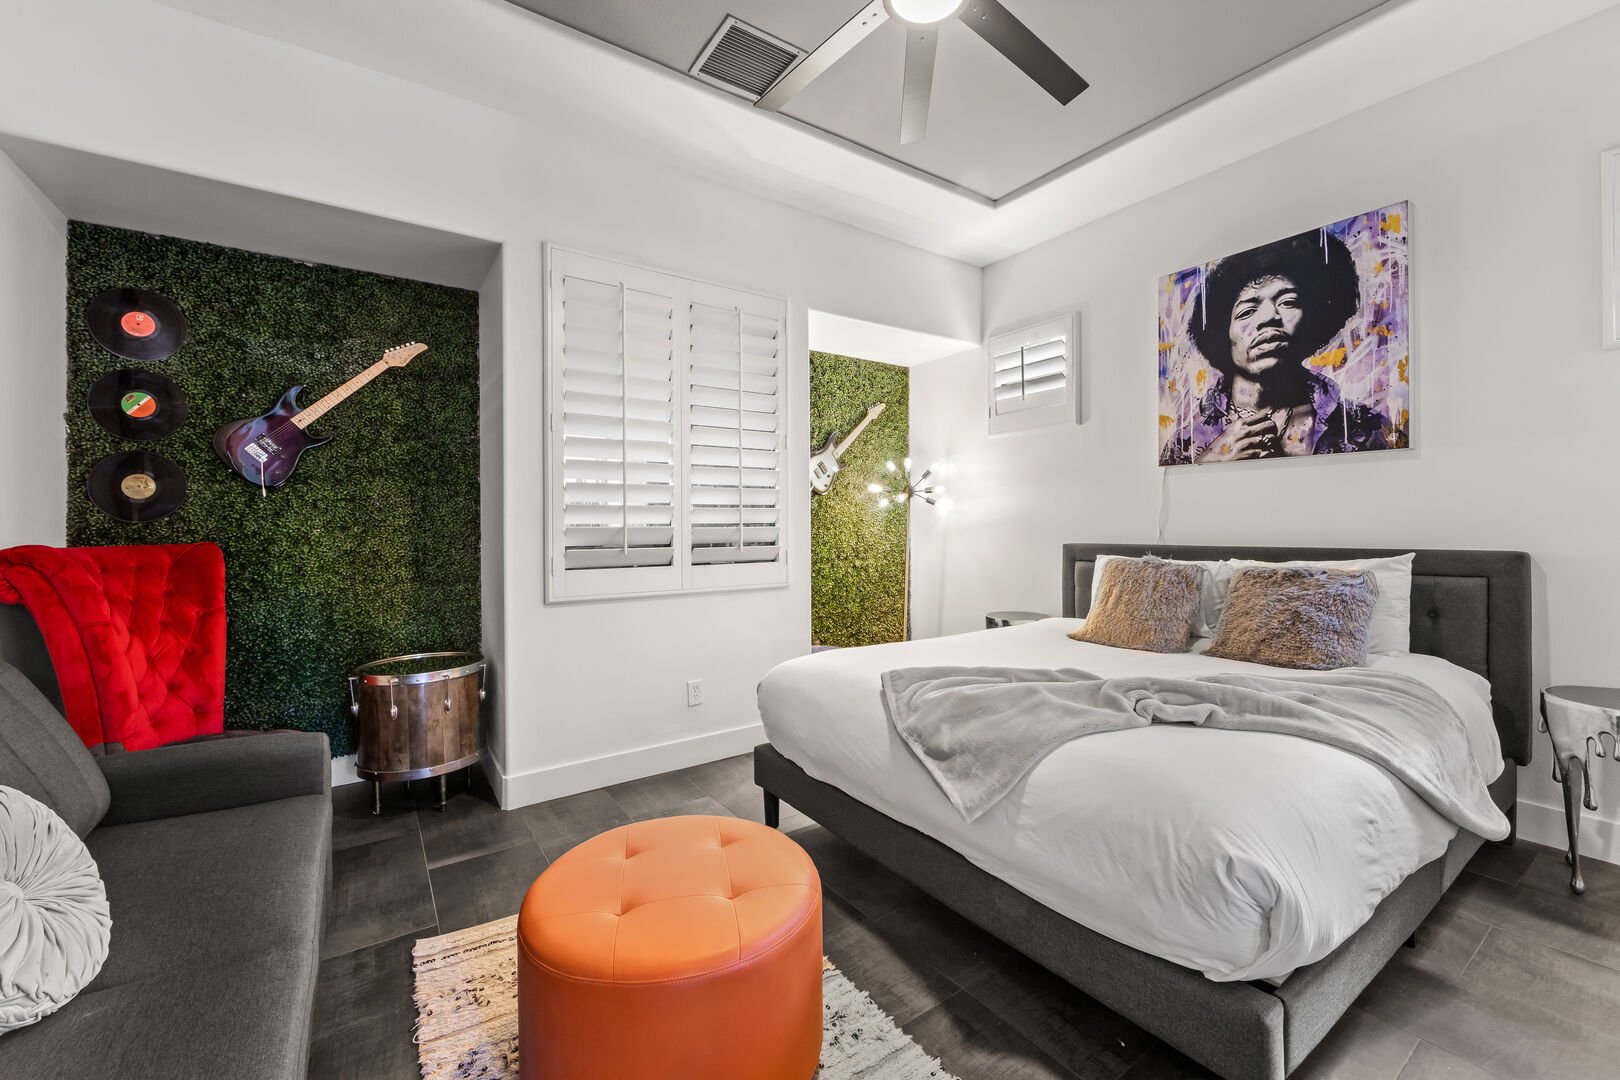 The separate Mega-Casita Suite 4 bedroom features a King-sized bed, Queen-sized sofa sleeper, double-sided gas fireplace, TV, and walk-in closet.